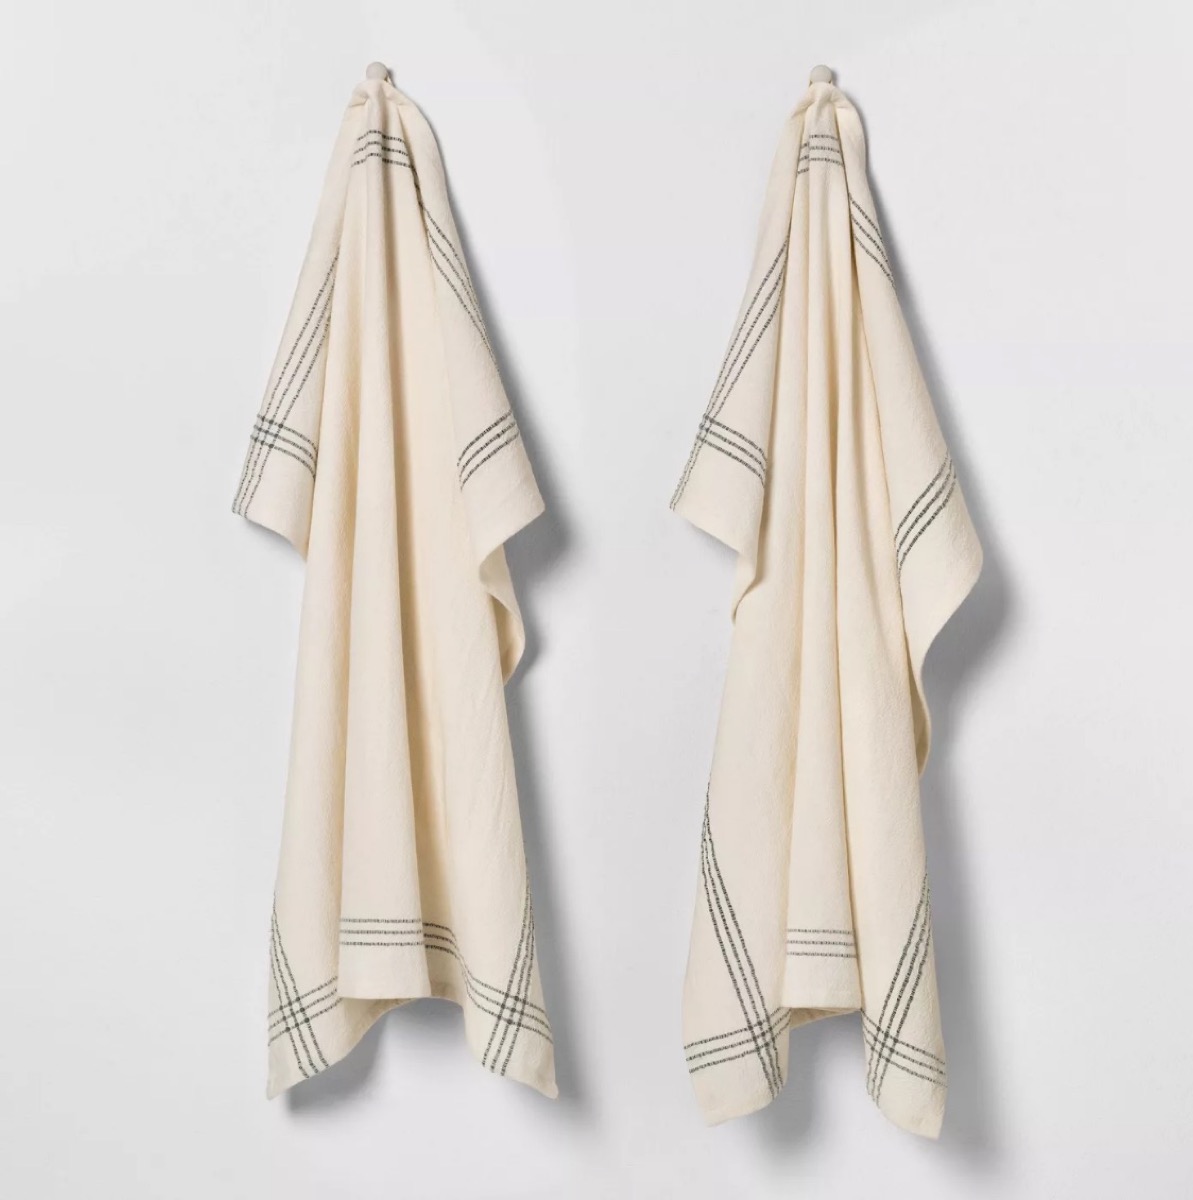 flour sack towels, old fashioned home items